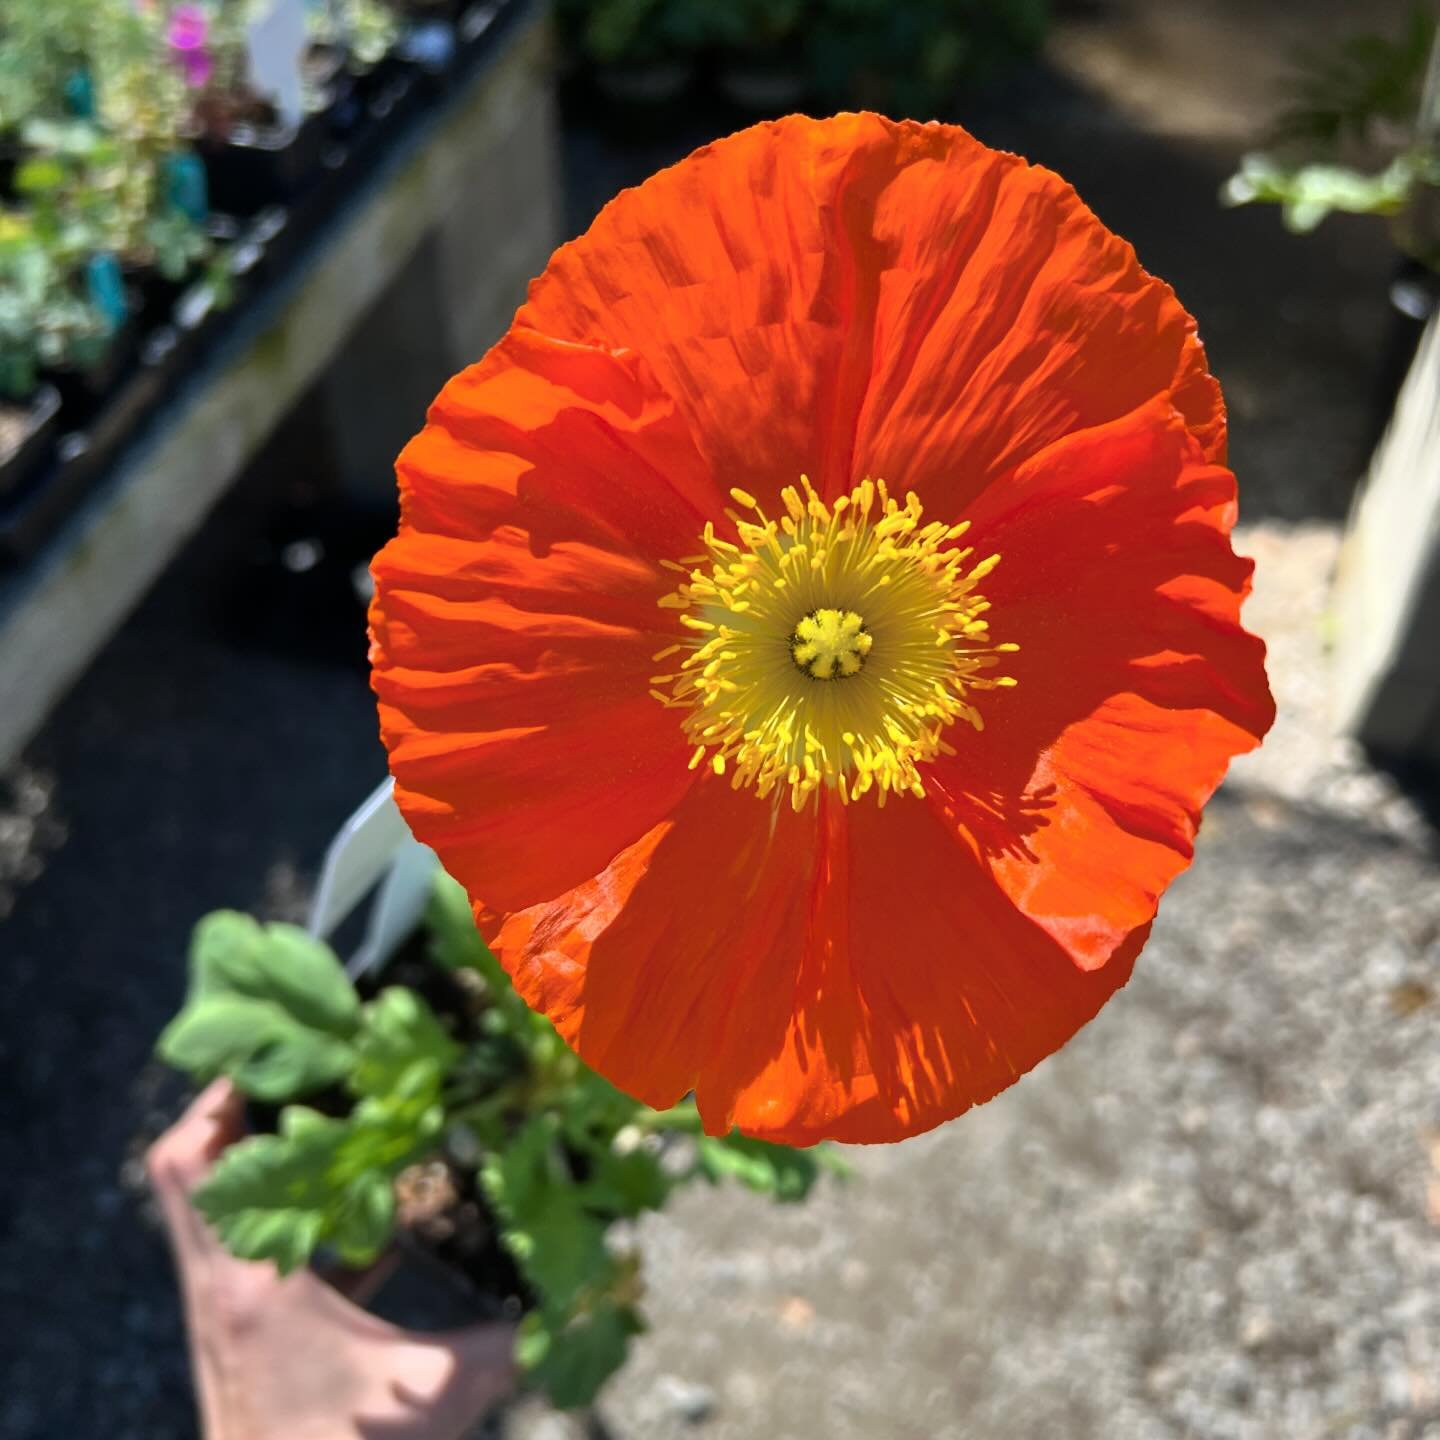 Keeping with today&rsquo;s sun-oriented theme: Papaver nudicaule &rsquo;Champagne Bubbles Orange&rsquo;! Bringing serious sun energy to the 4&rdquo; plant tables! ☀️🌼

#capitolwholesalenursery #totalsolareclipse #orangeflowers #springflowers #spring